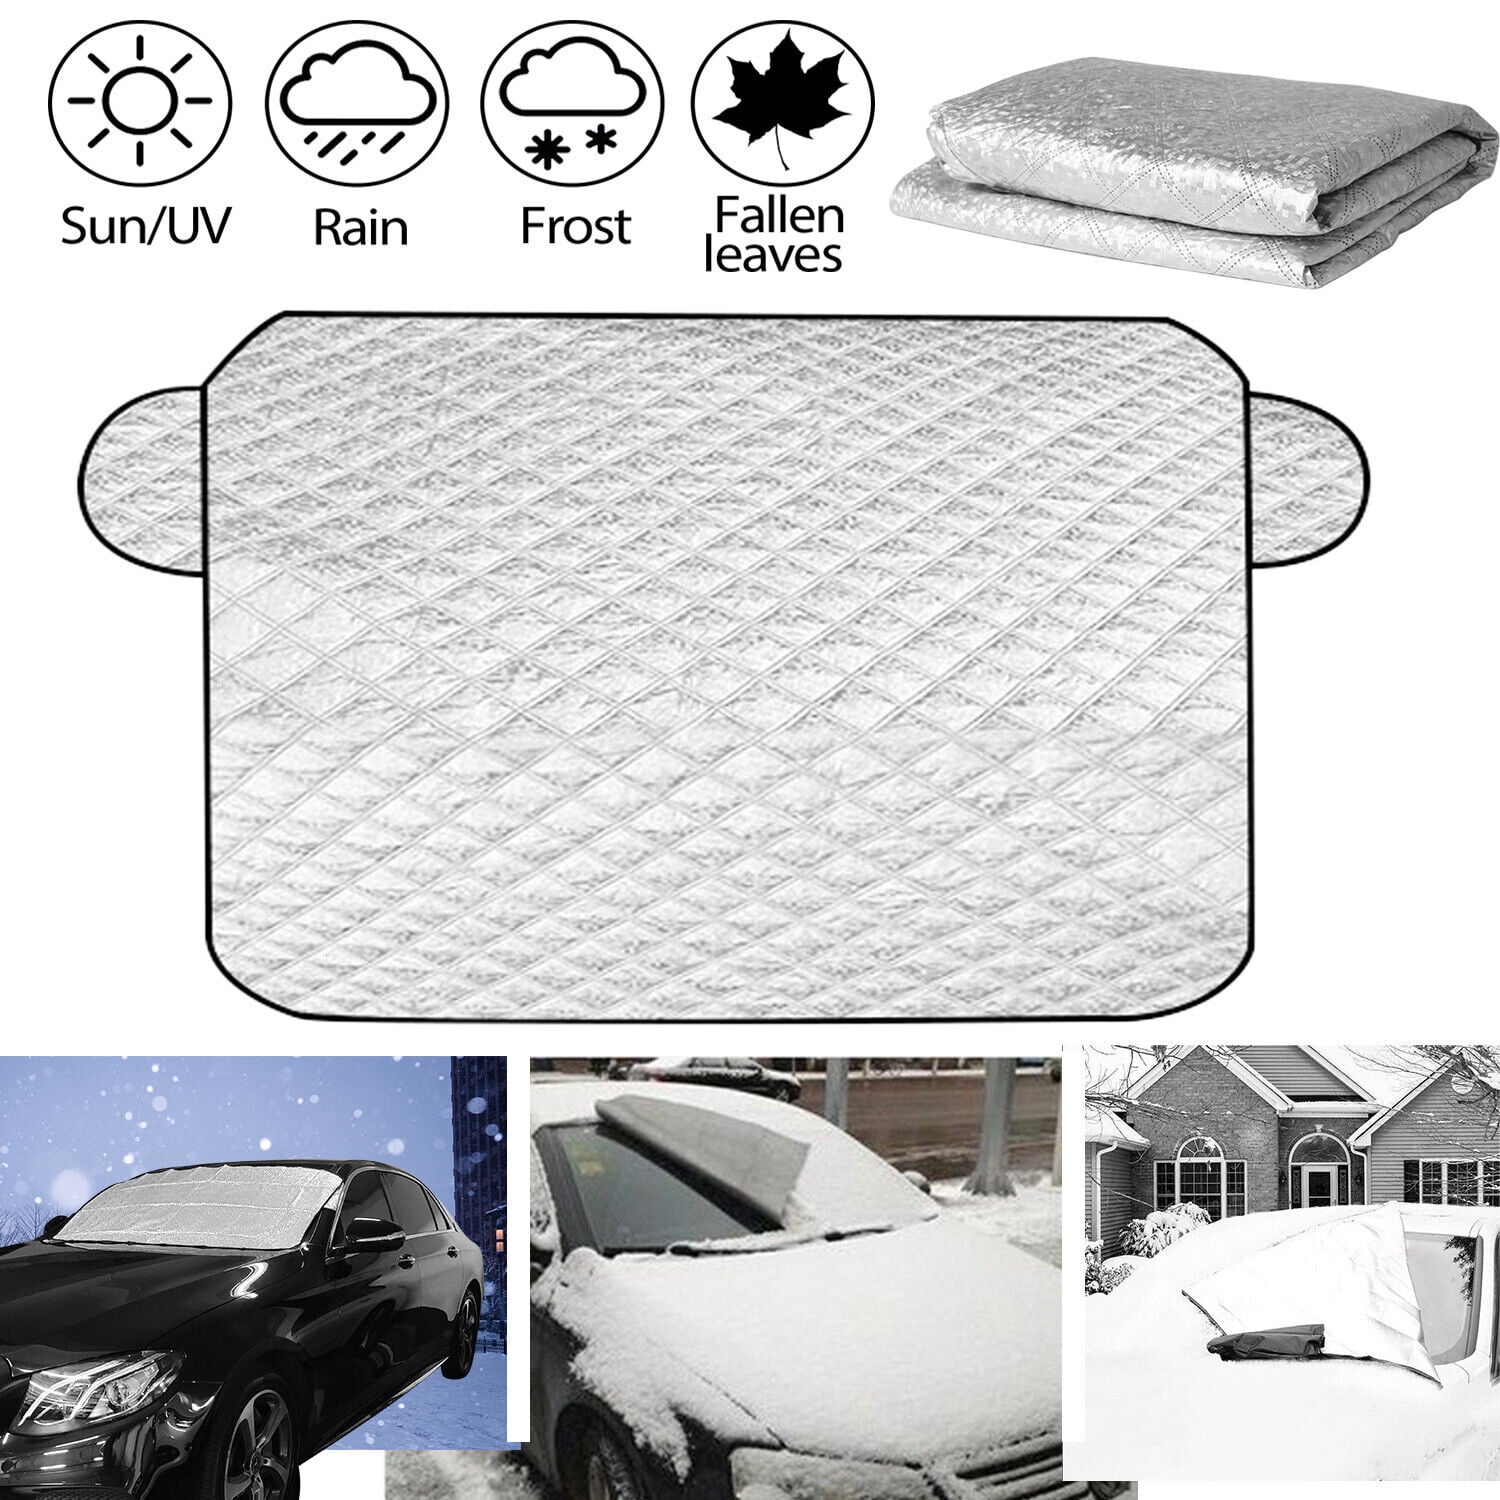 DELK - Frost Guard Pro Snow Shield For Car Windshields FG-PRO, Prevent  Frost, Snow & Ice Building On Your Windshield